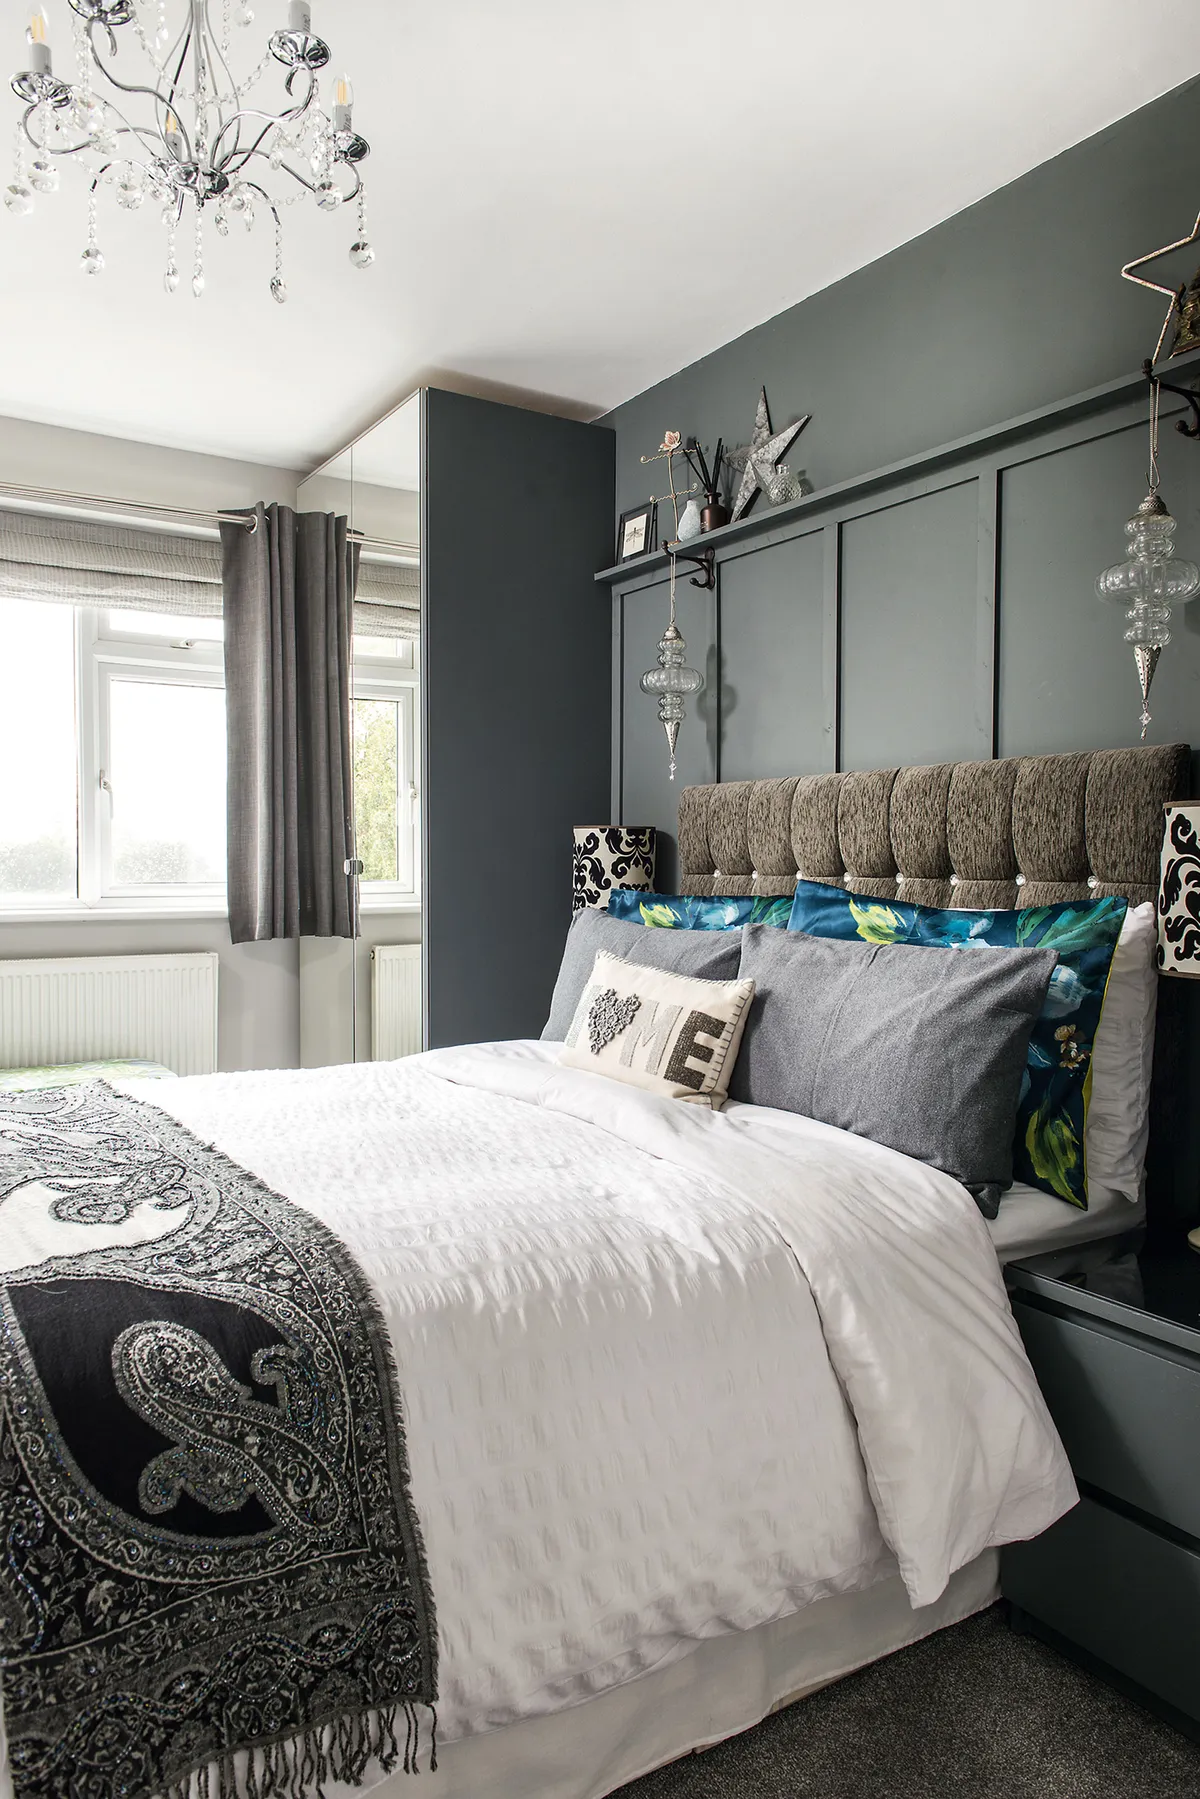 The couple have combined panelling, painted in Farrow & Ball’s Down Pipe, and a velvet headboard from eBay to create a luxurious sanctuary in their main bedroom